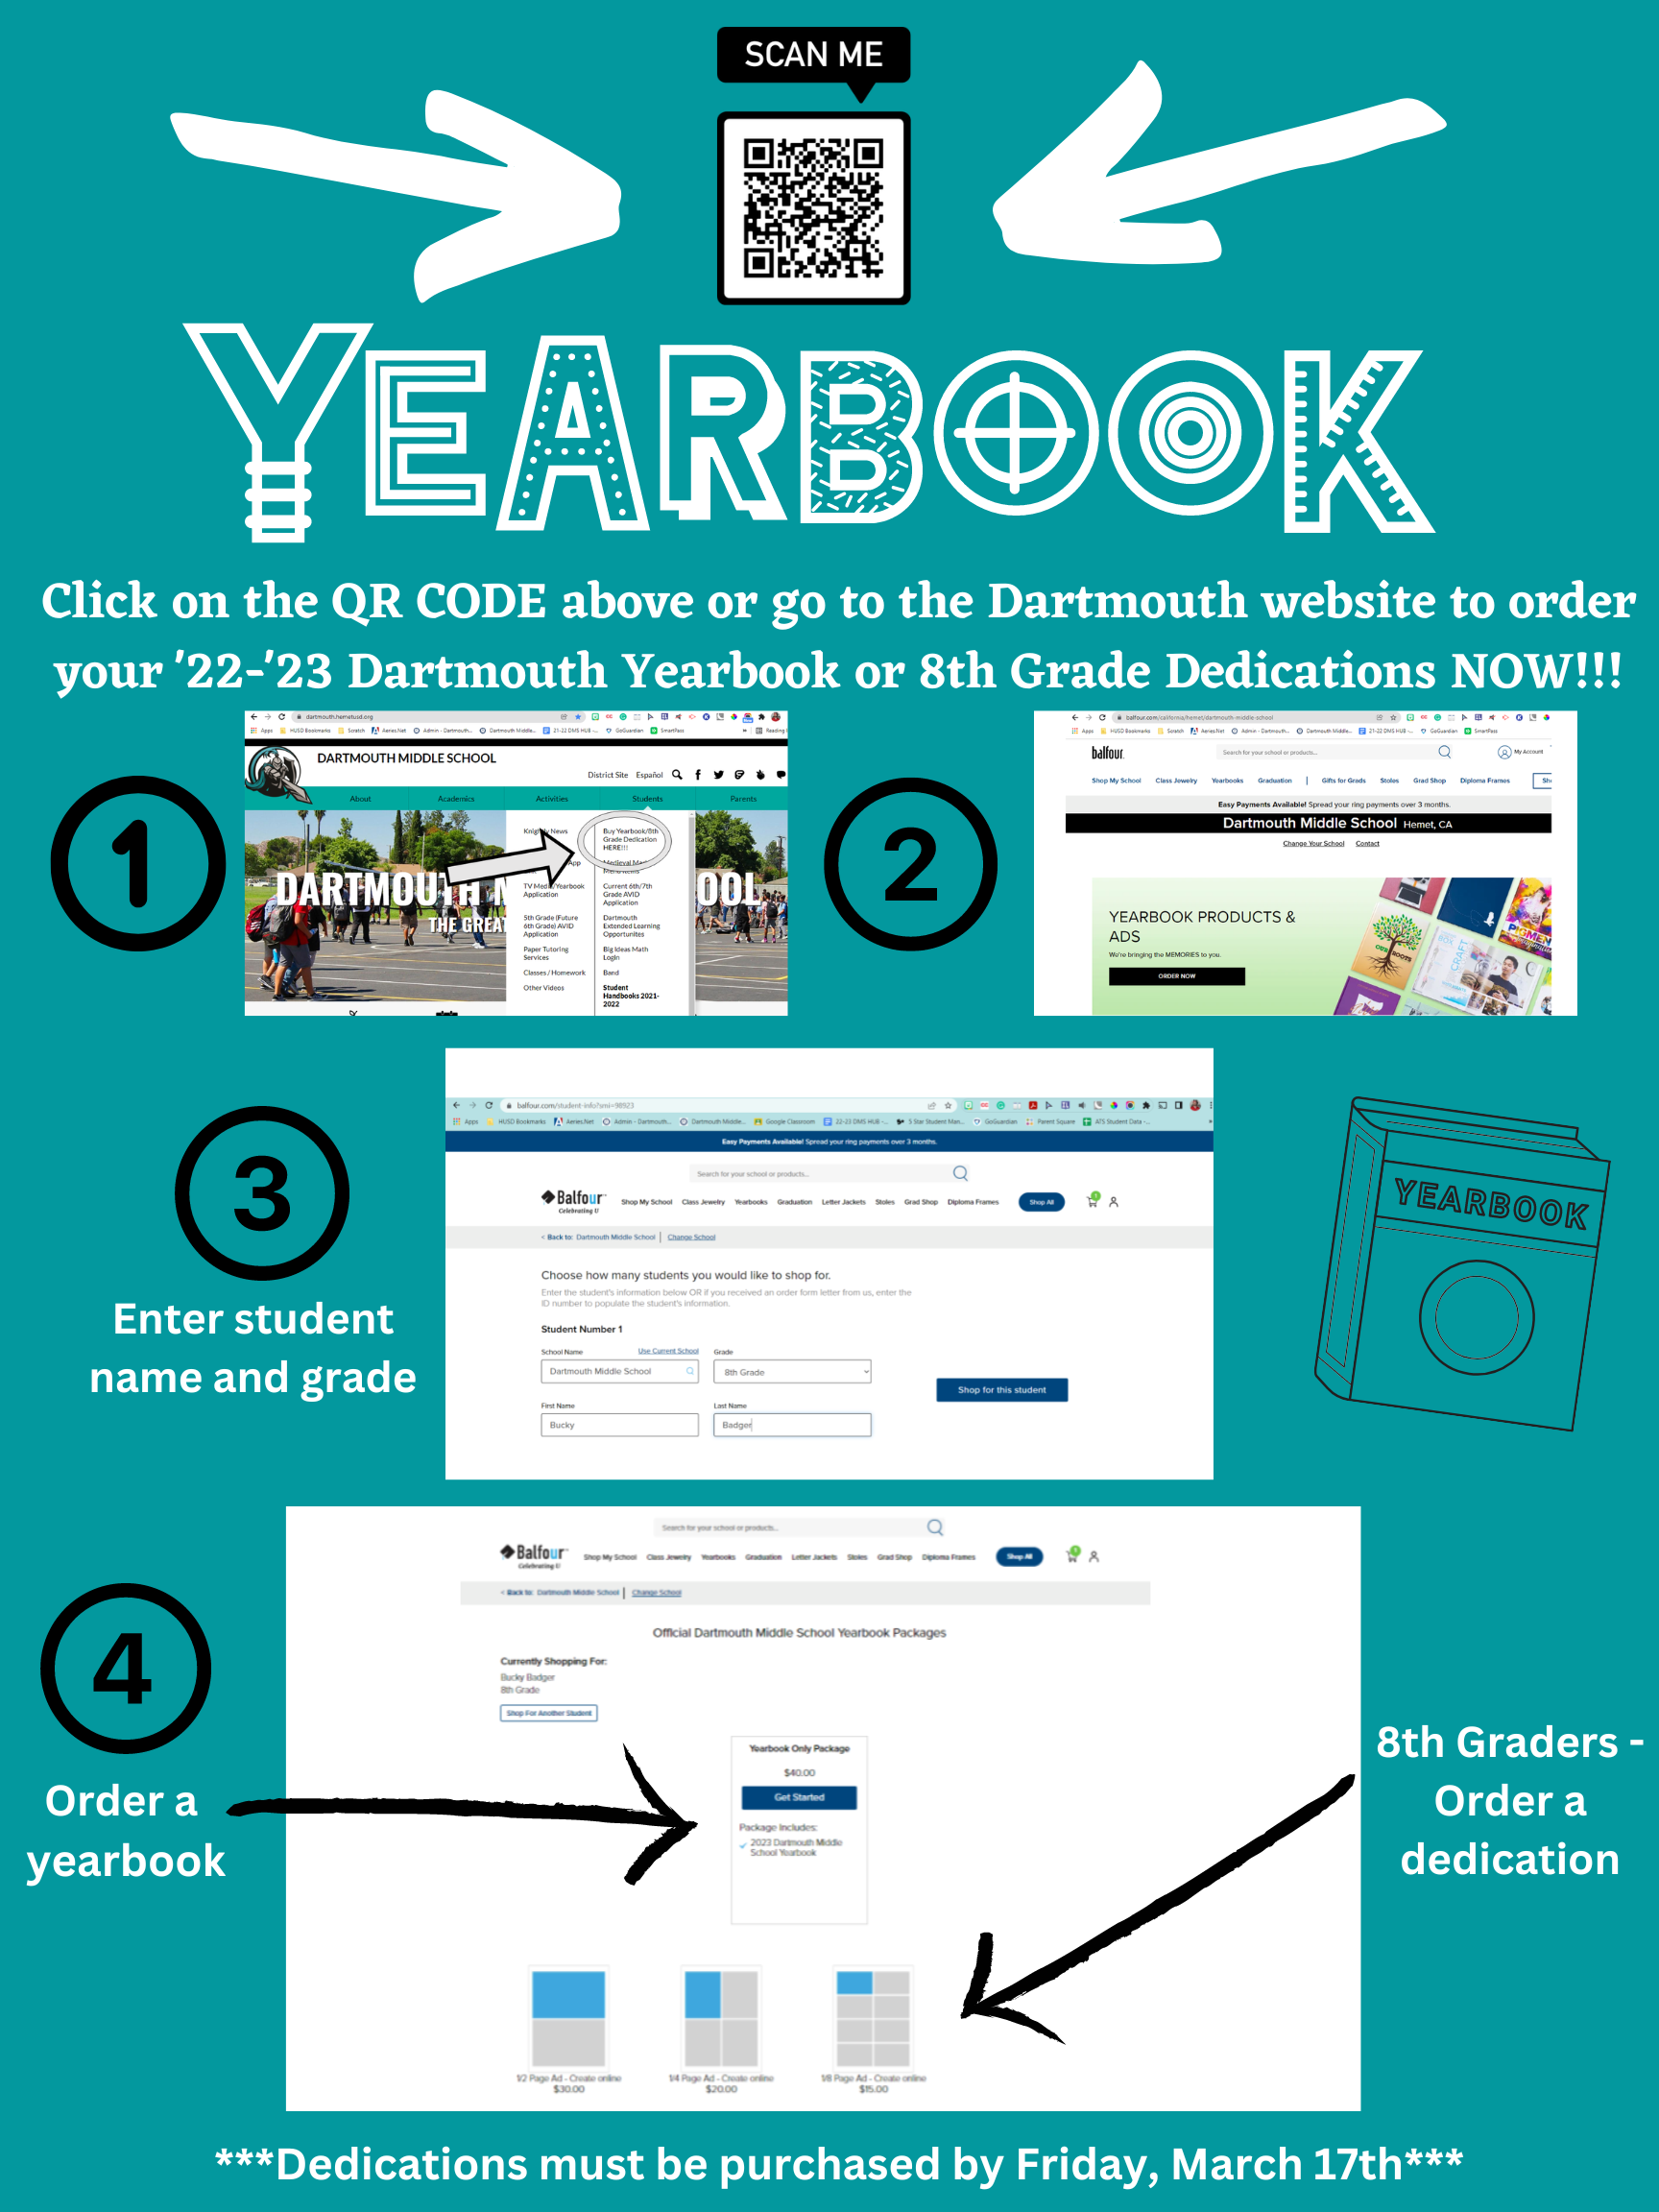 Yearbook and Parent Dedication Information